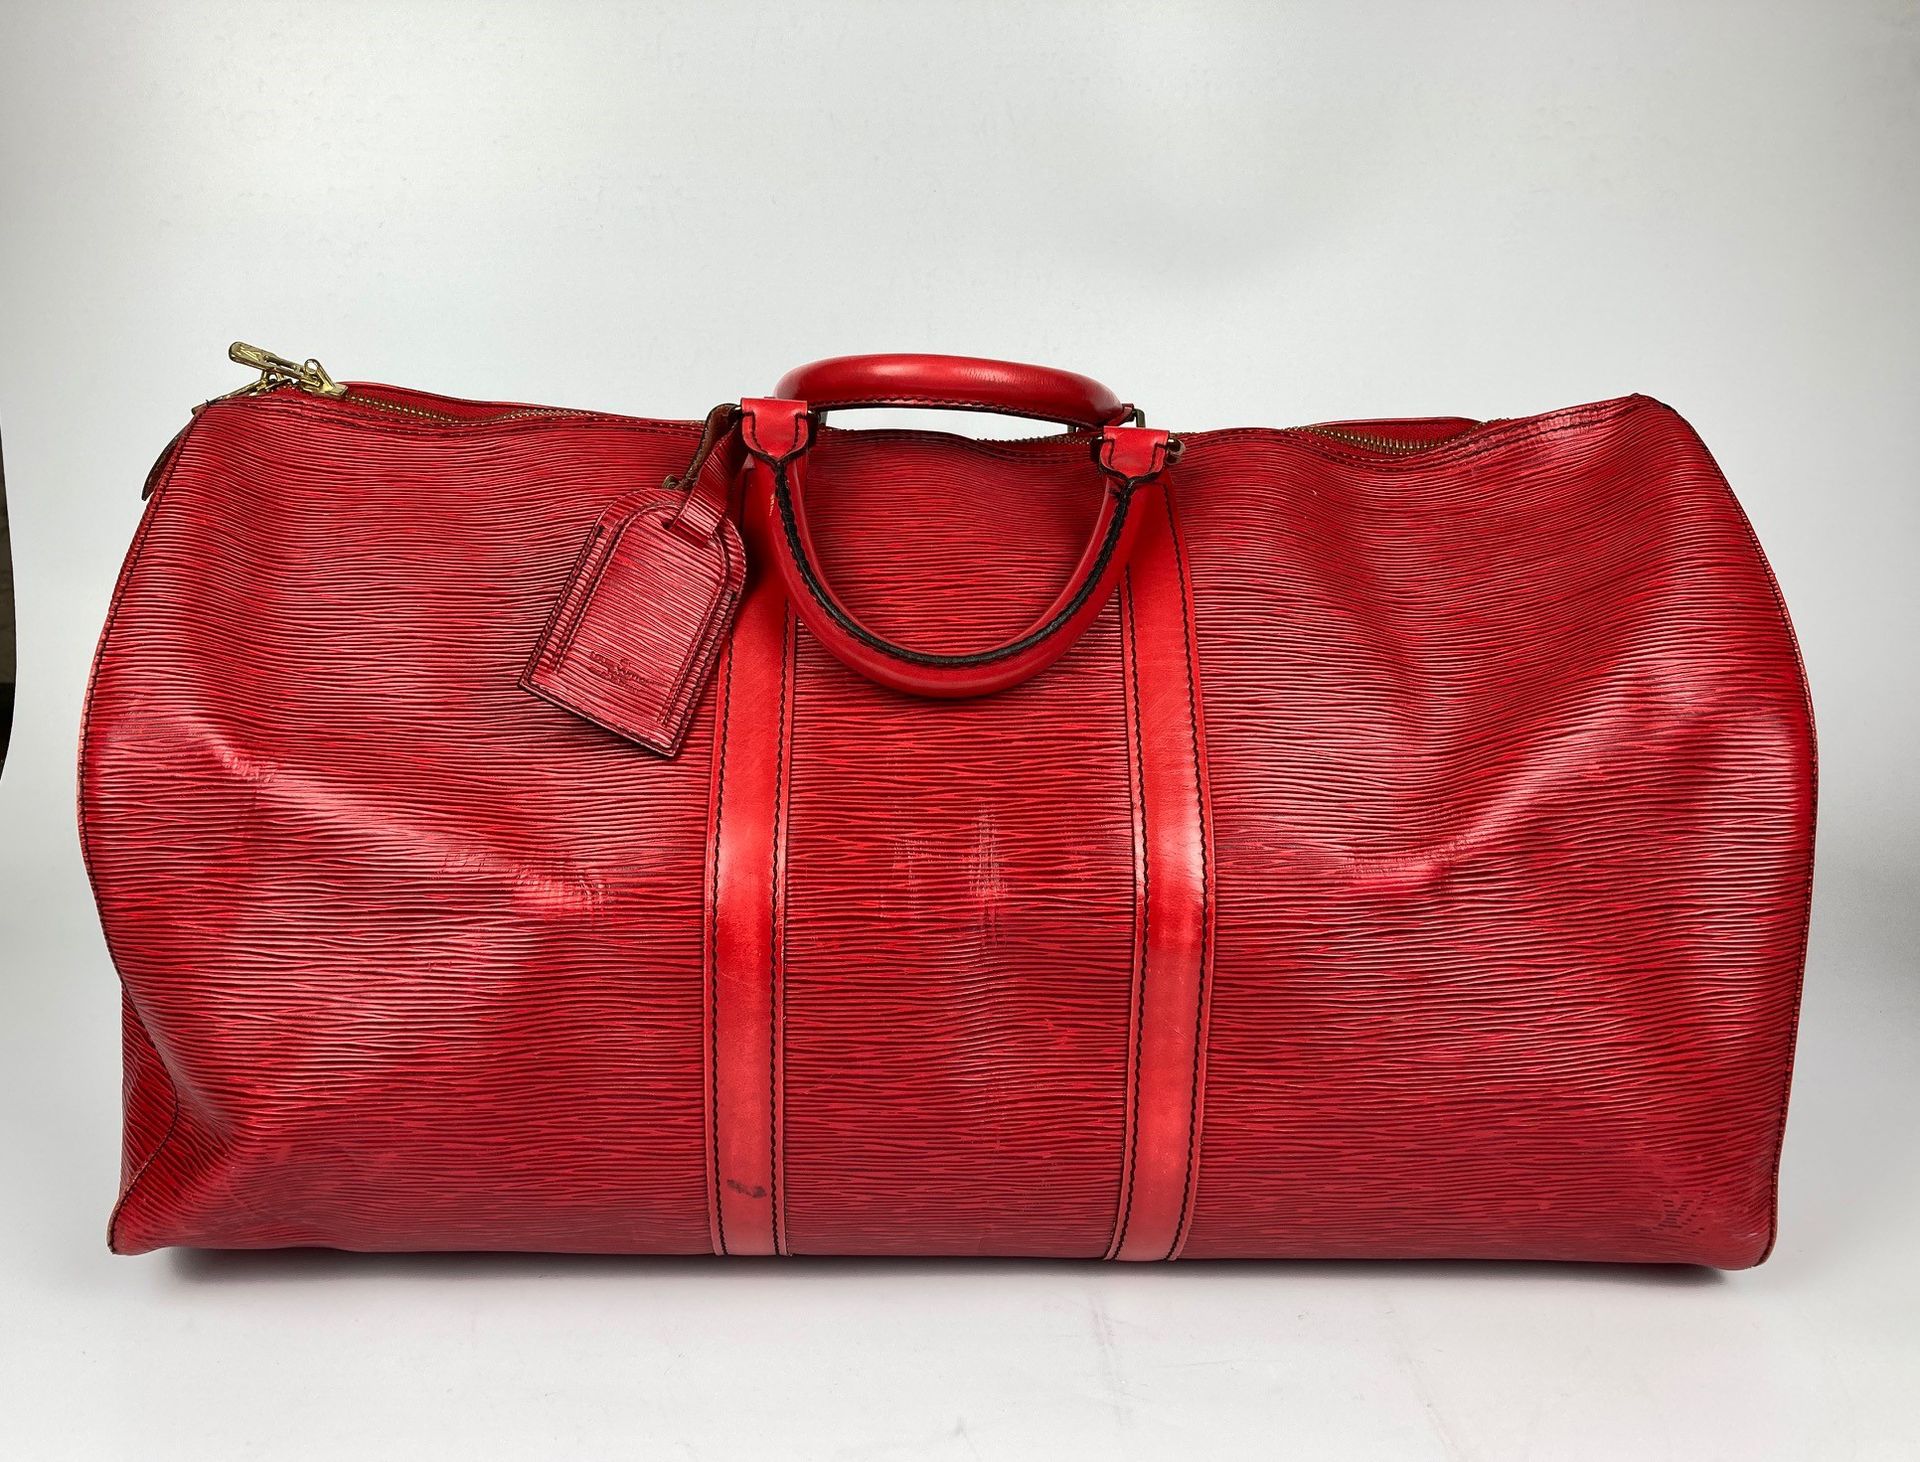 Null LOUIS VUITTON Travel bag, "Keepall" 55 model. In red Epi leather, gilt meta&hellip;